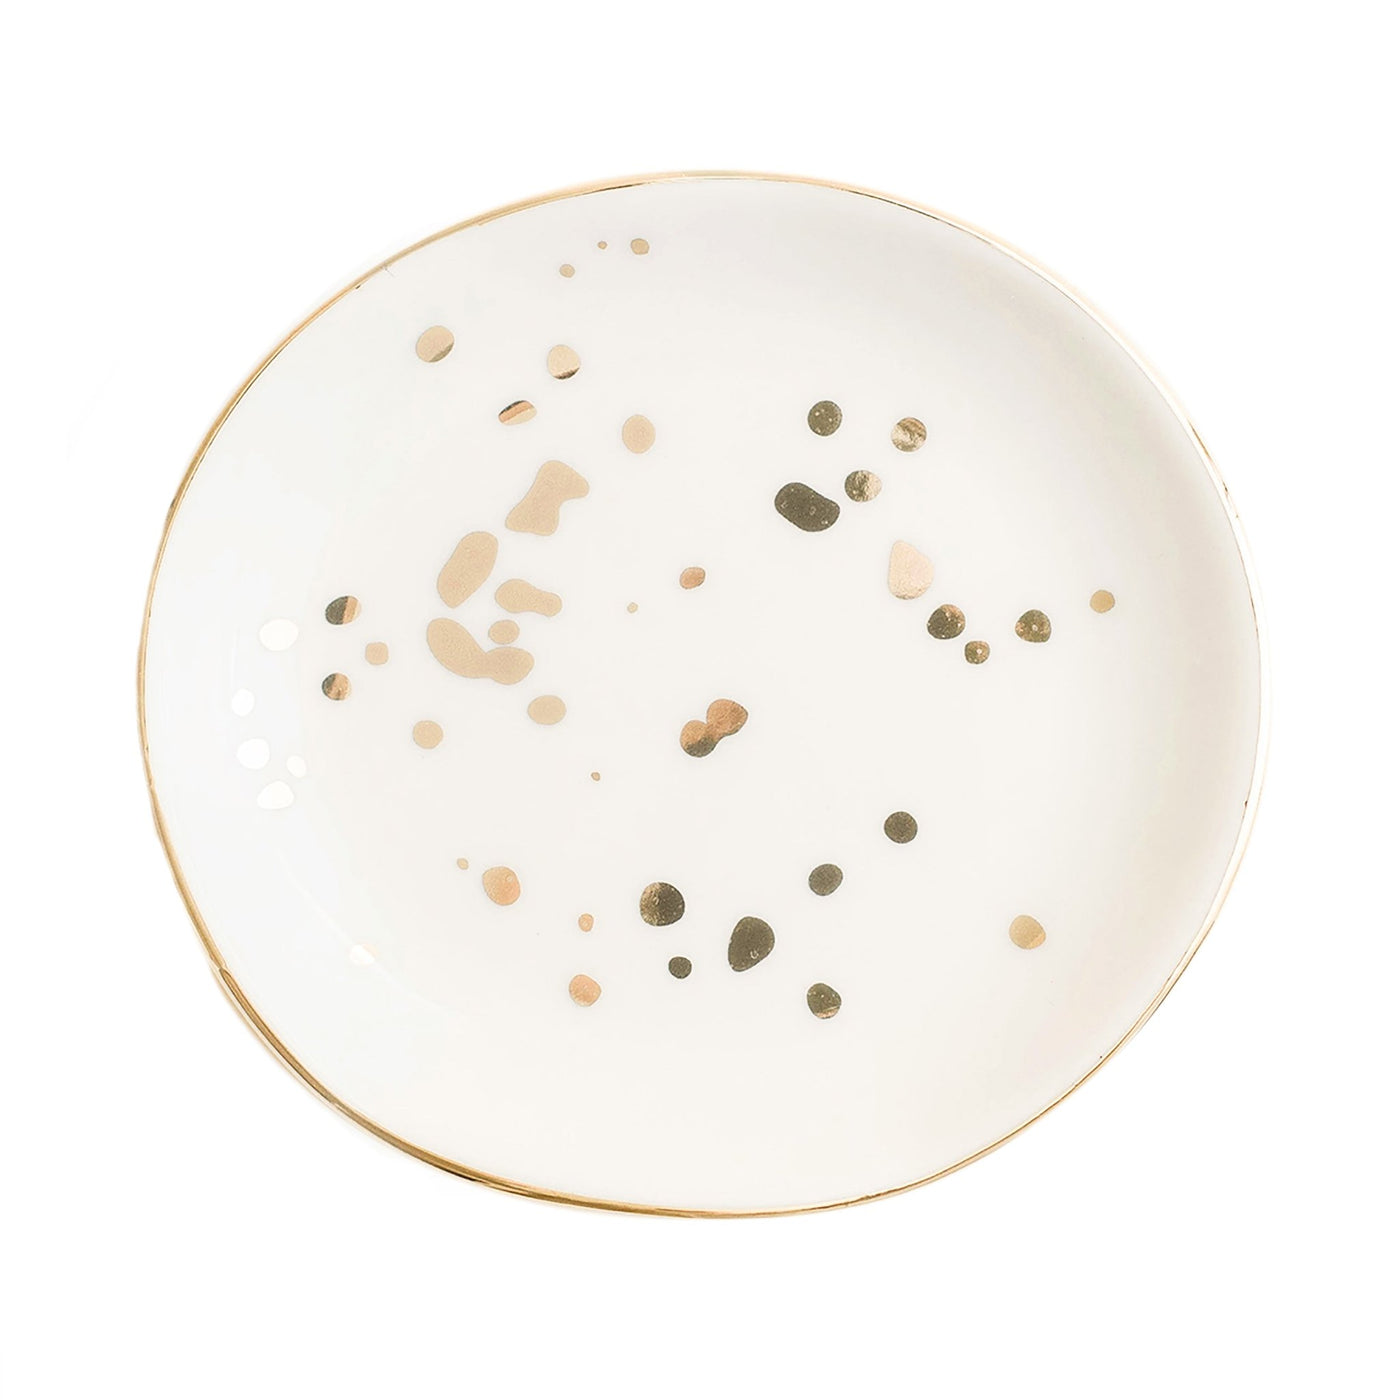 Gold Speckled Jewelry Dish - Sweet Water Decor - Jewelry Dishes